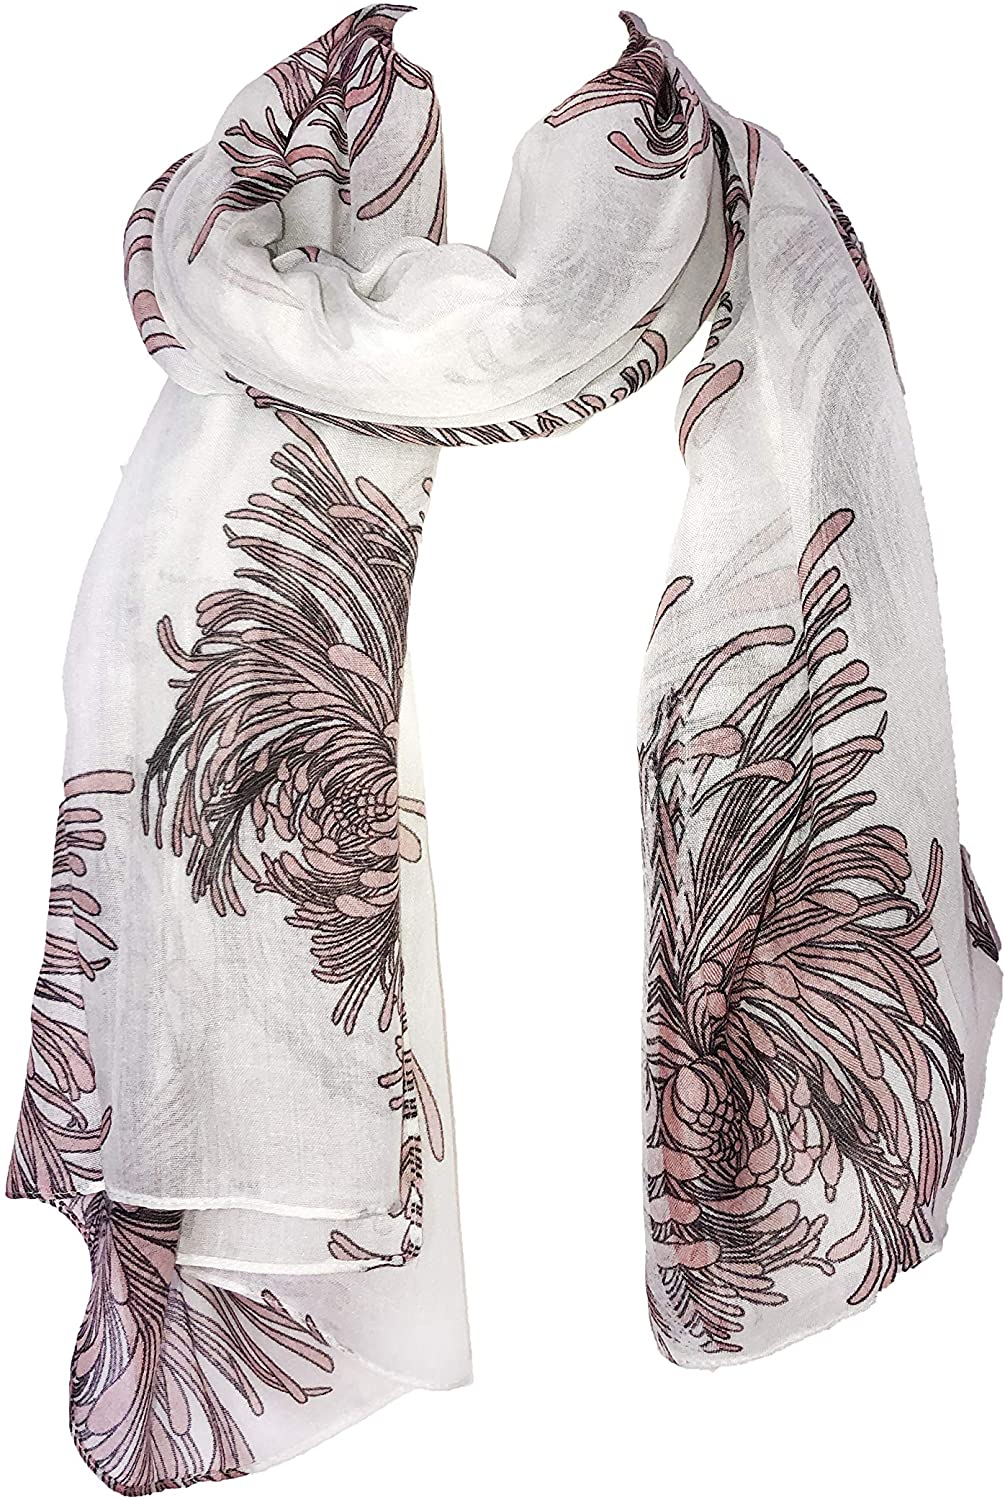 Pamper Yourself Now Cream with Pink Chrysanthemum Flower Long Scarf, Soft Ladies Fashion London